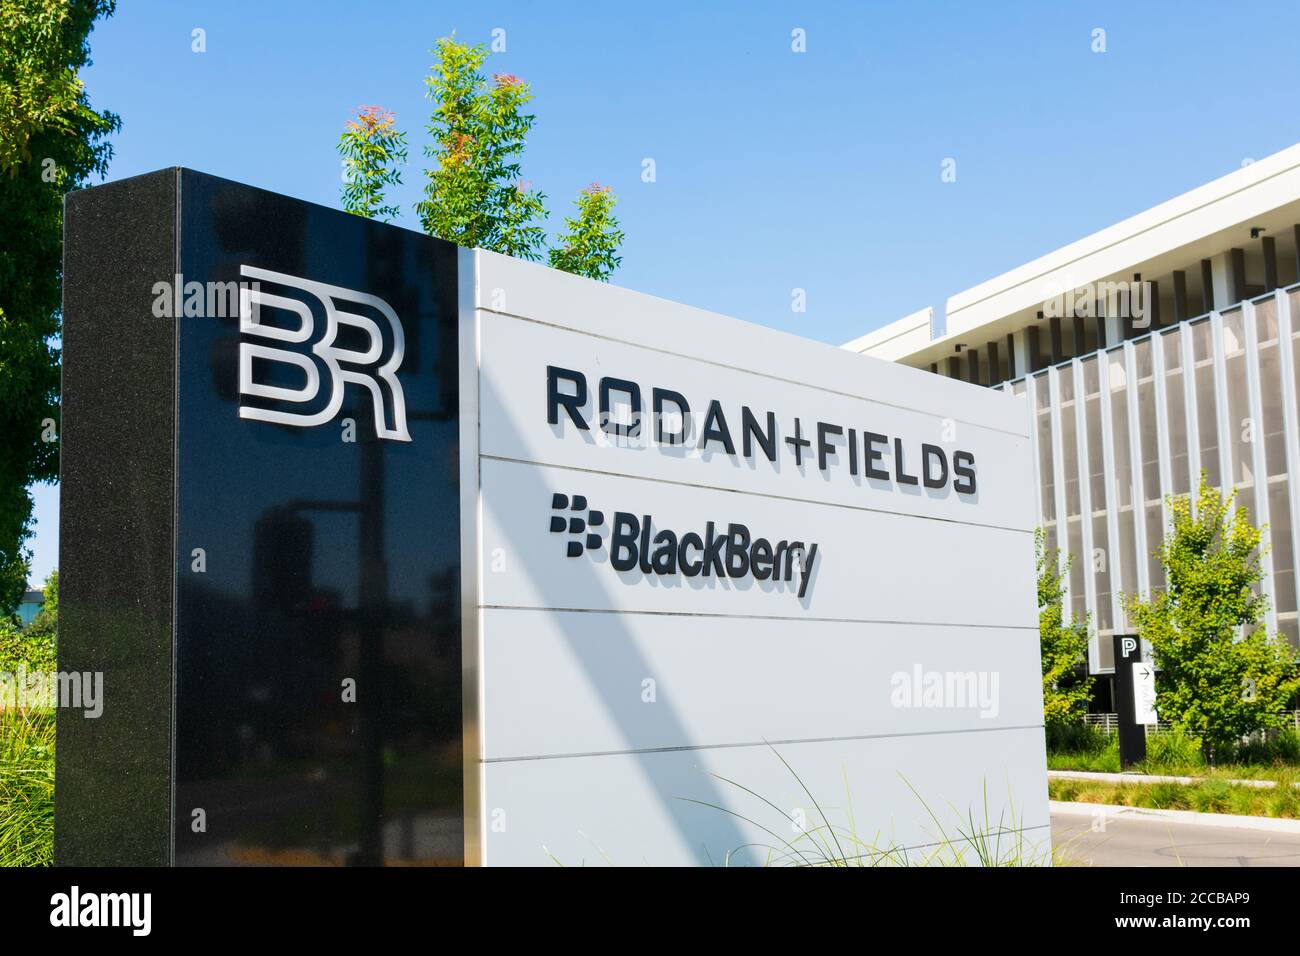 Rodan Fields multi-level marketing and Blackberry software companies signpost at Bishop Ranch business park - San Ramon, CA, USA - October 2019 Stock Photo